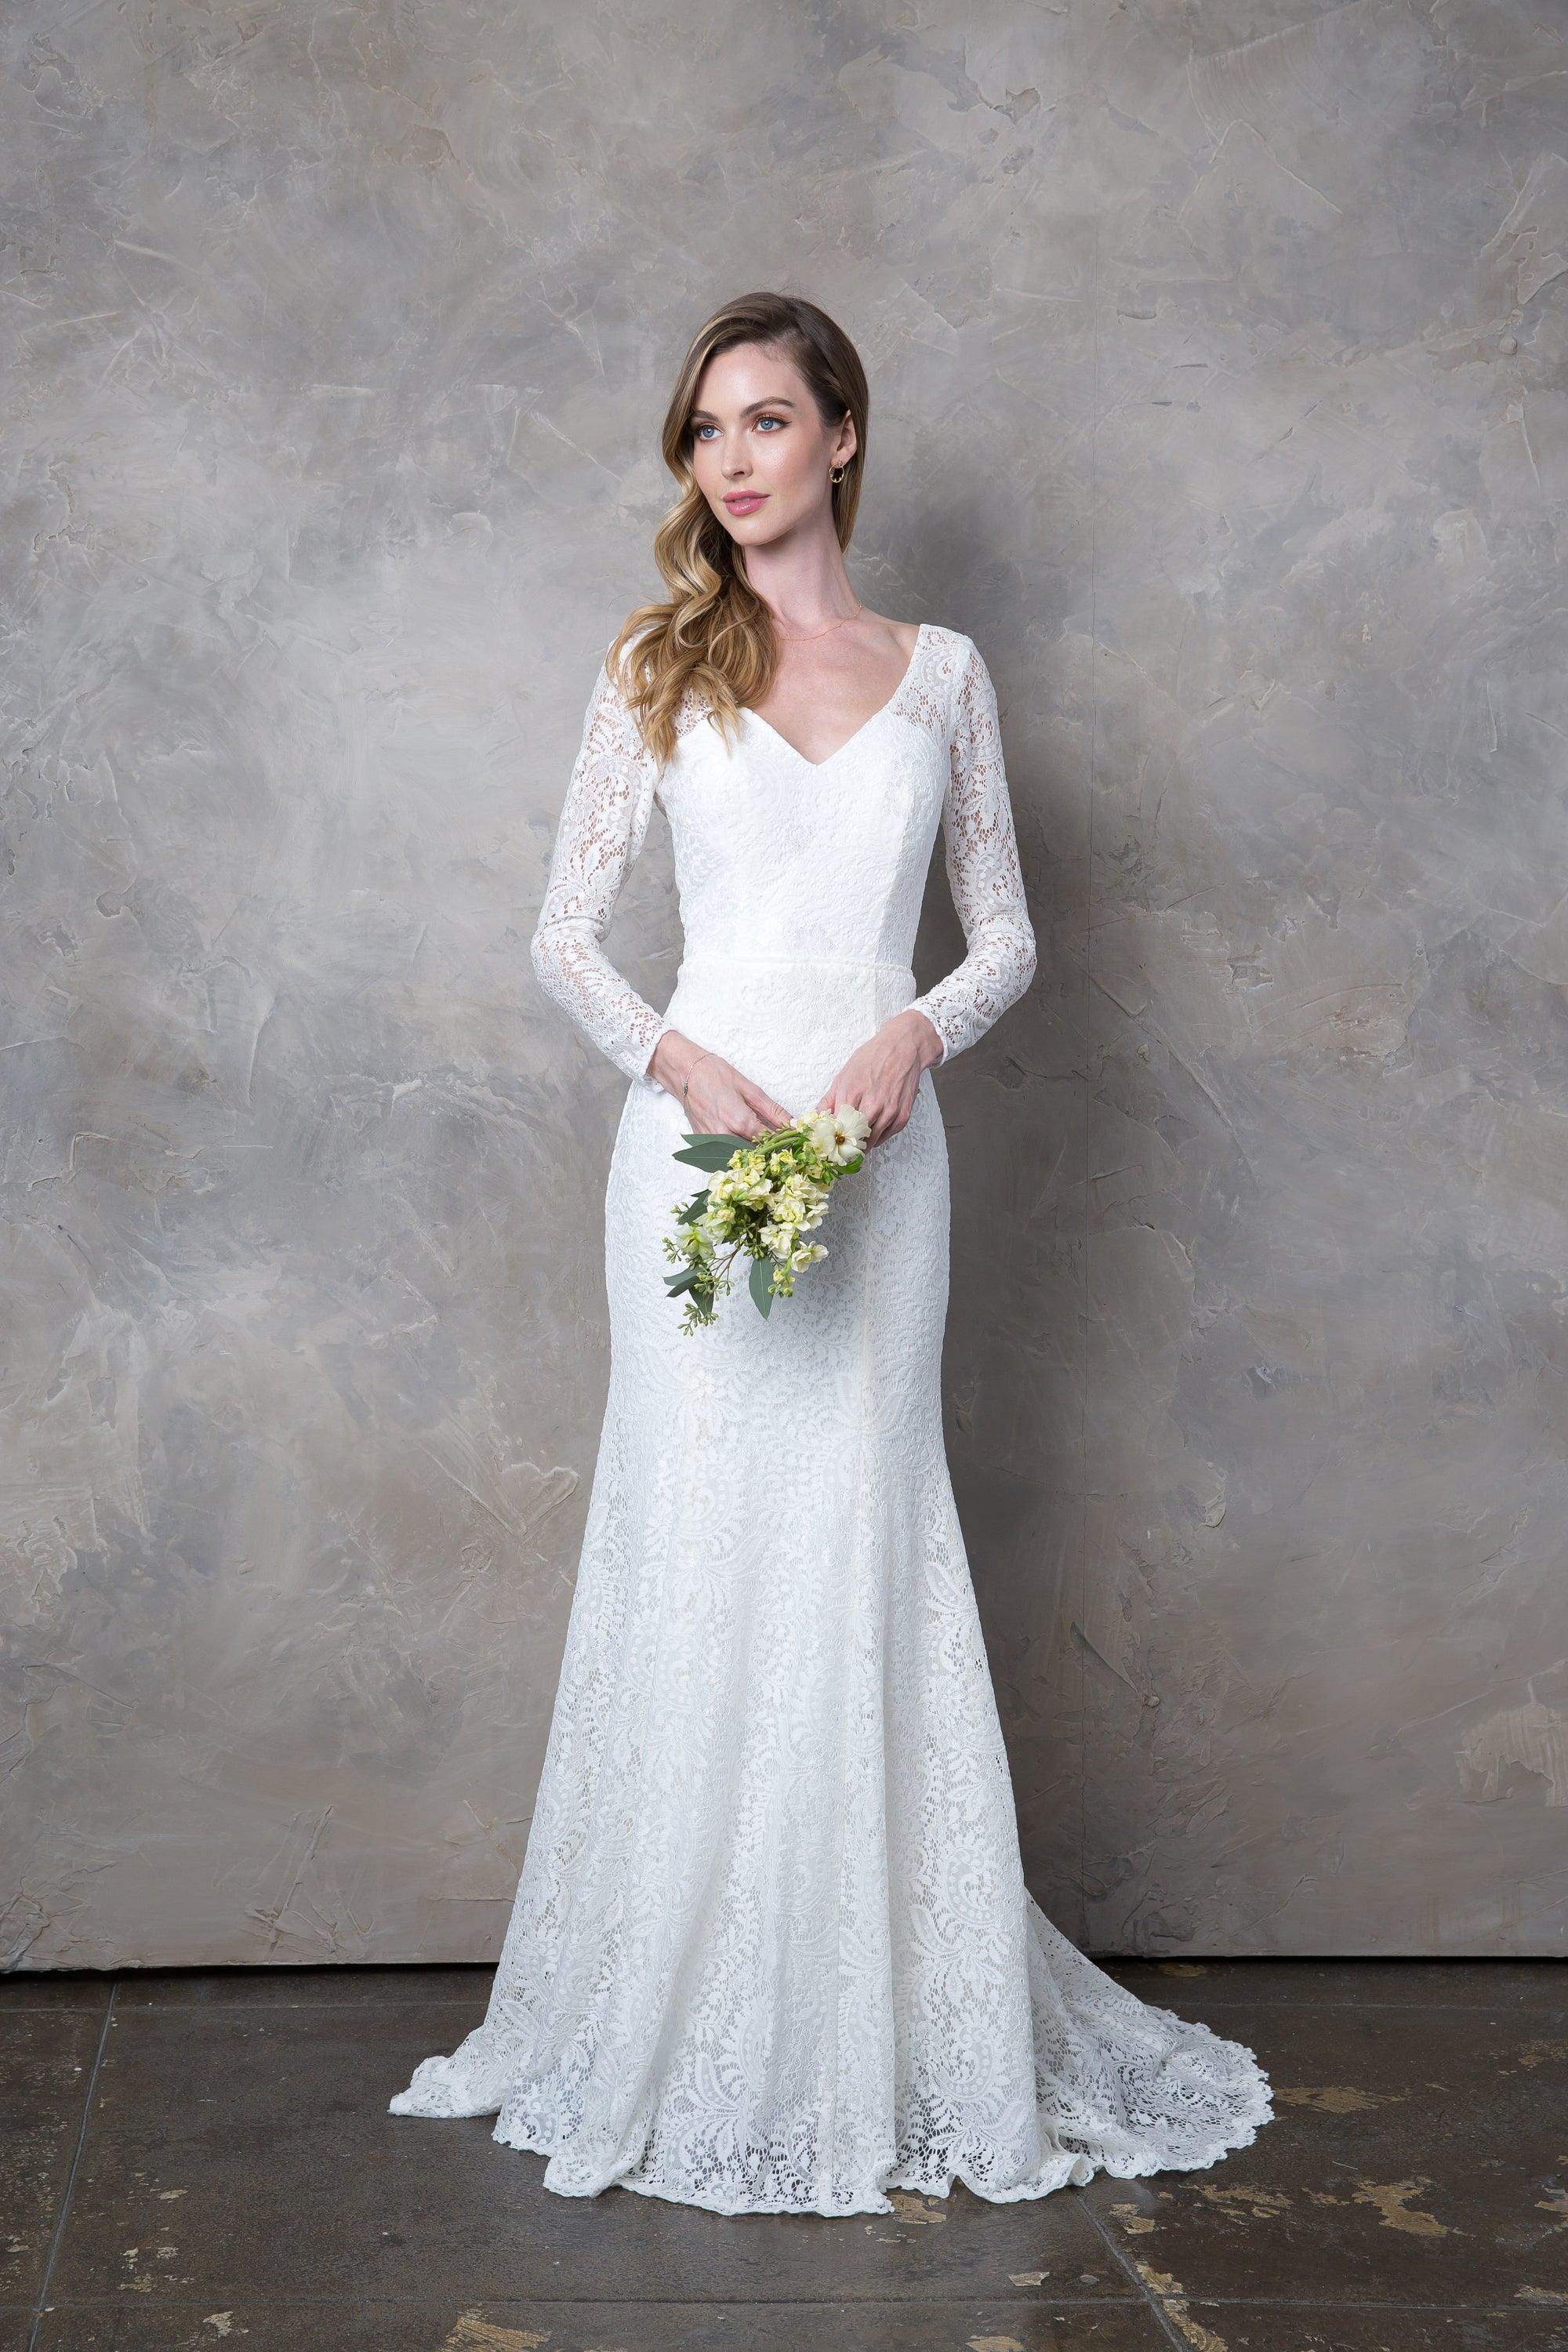 Plus size wedding dresses with Long sleeves from Darius Cordell